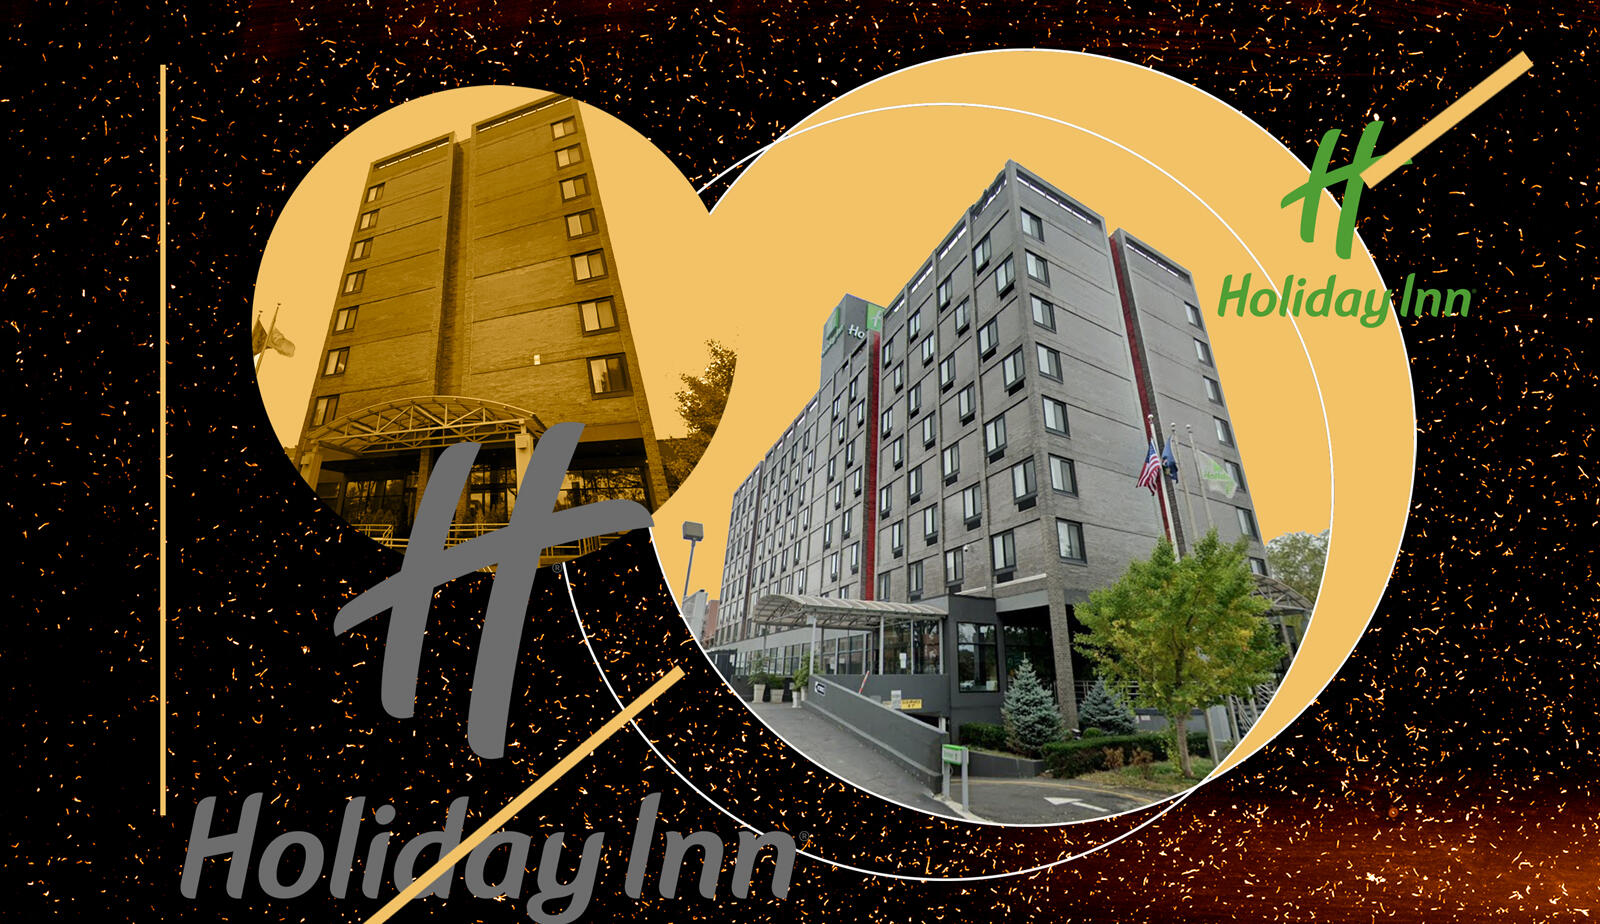 Holiday Inn at 37-10 114th Street in Corona, Queens (Google Maps)